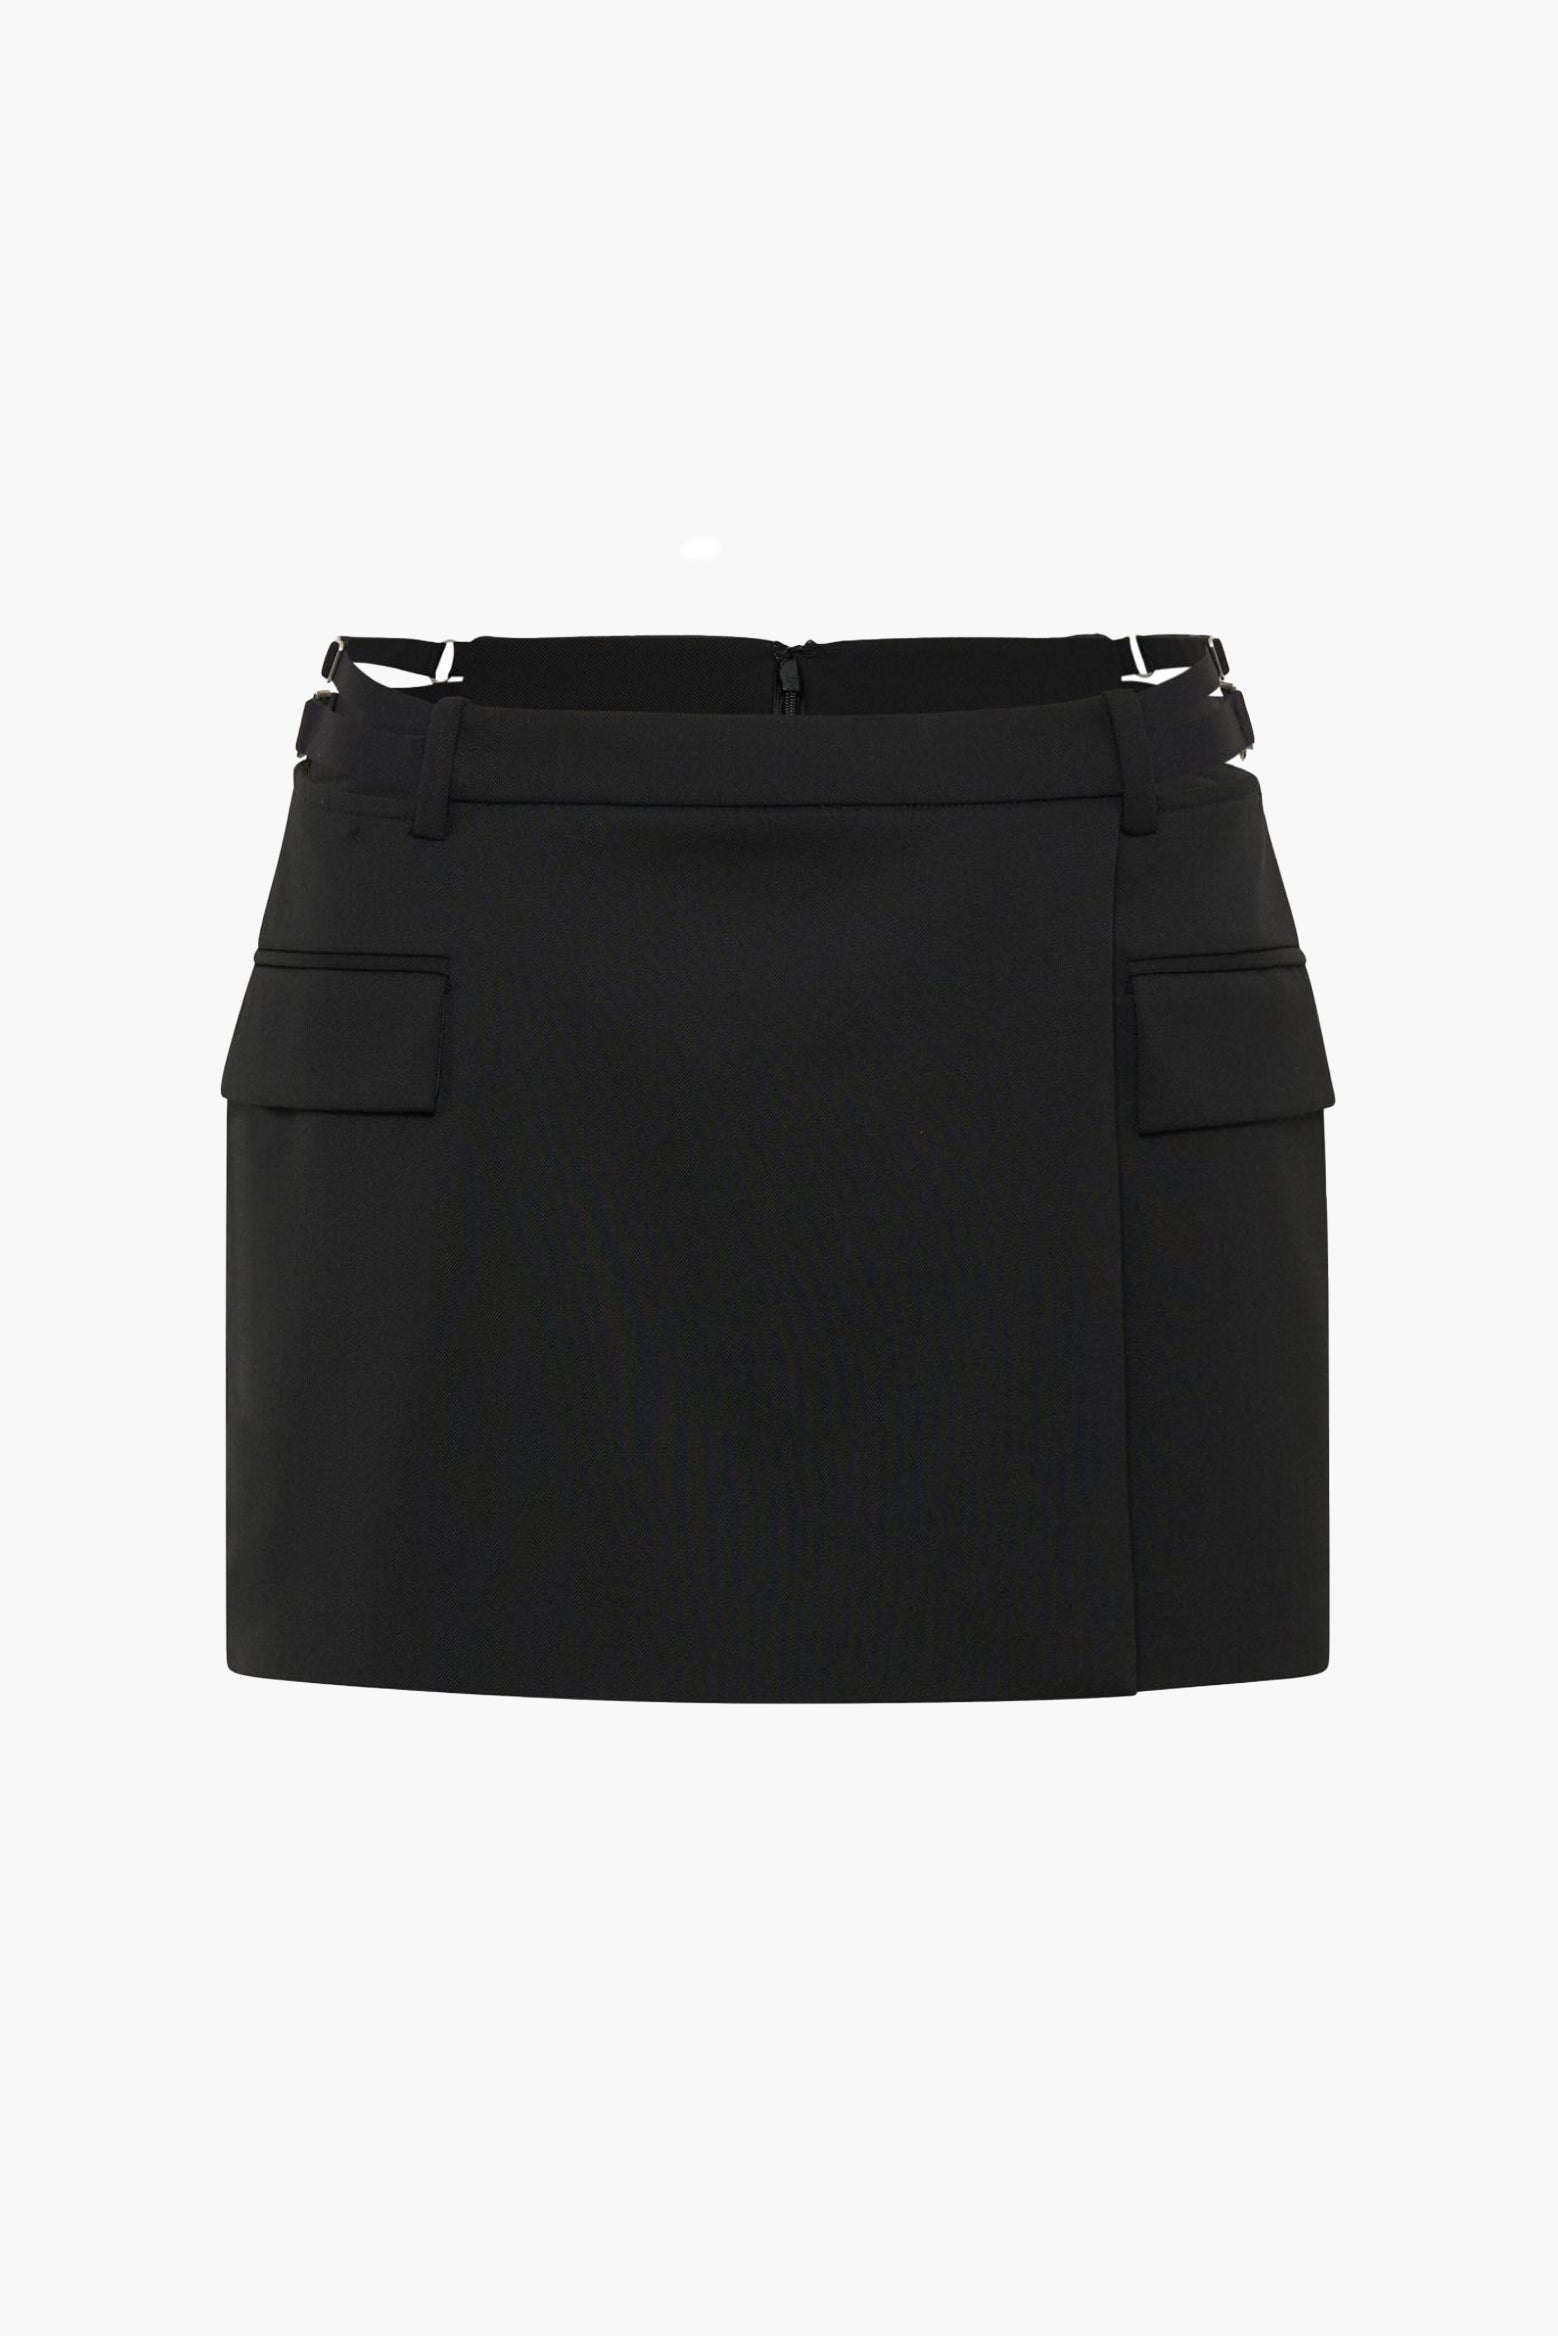 The Dion Lee Lingerie Wool Mini Skirt in Black available at The New Trend Australia